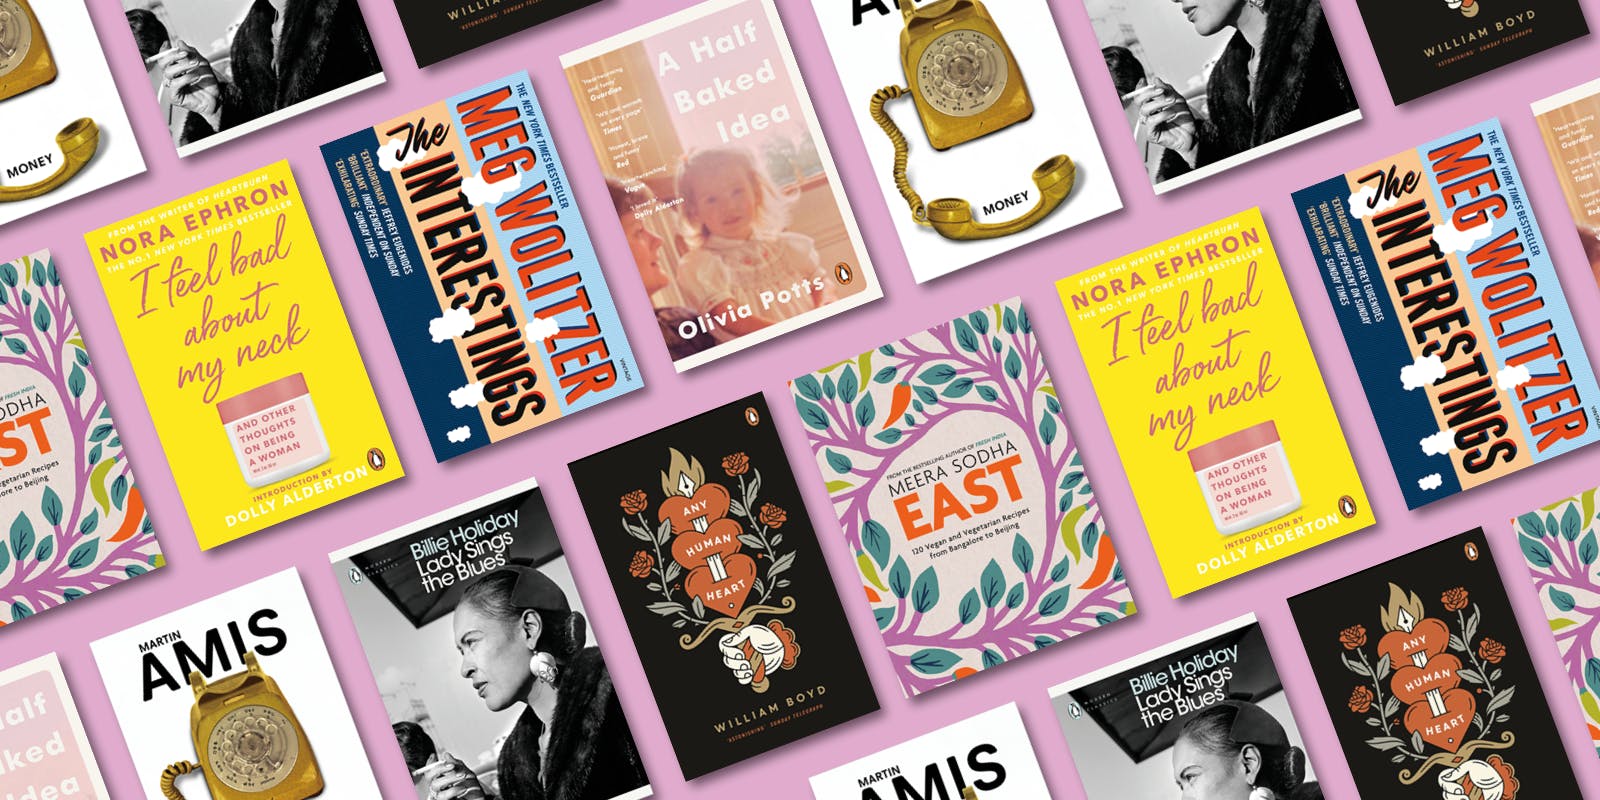 7 books recommended by Dolly Alderton